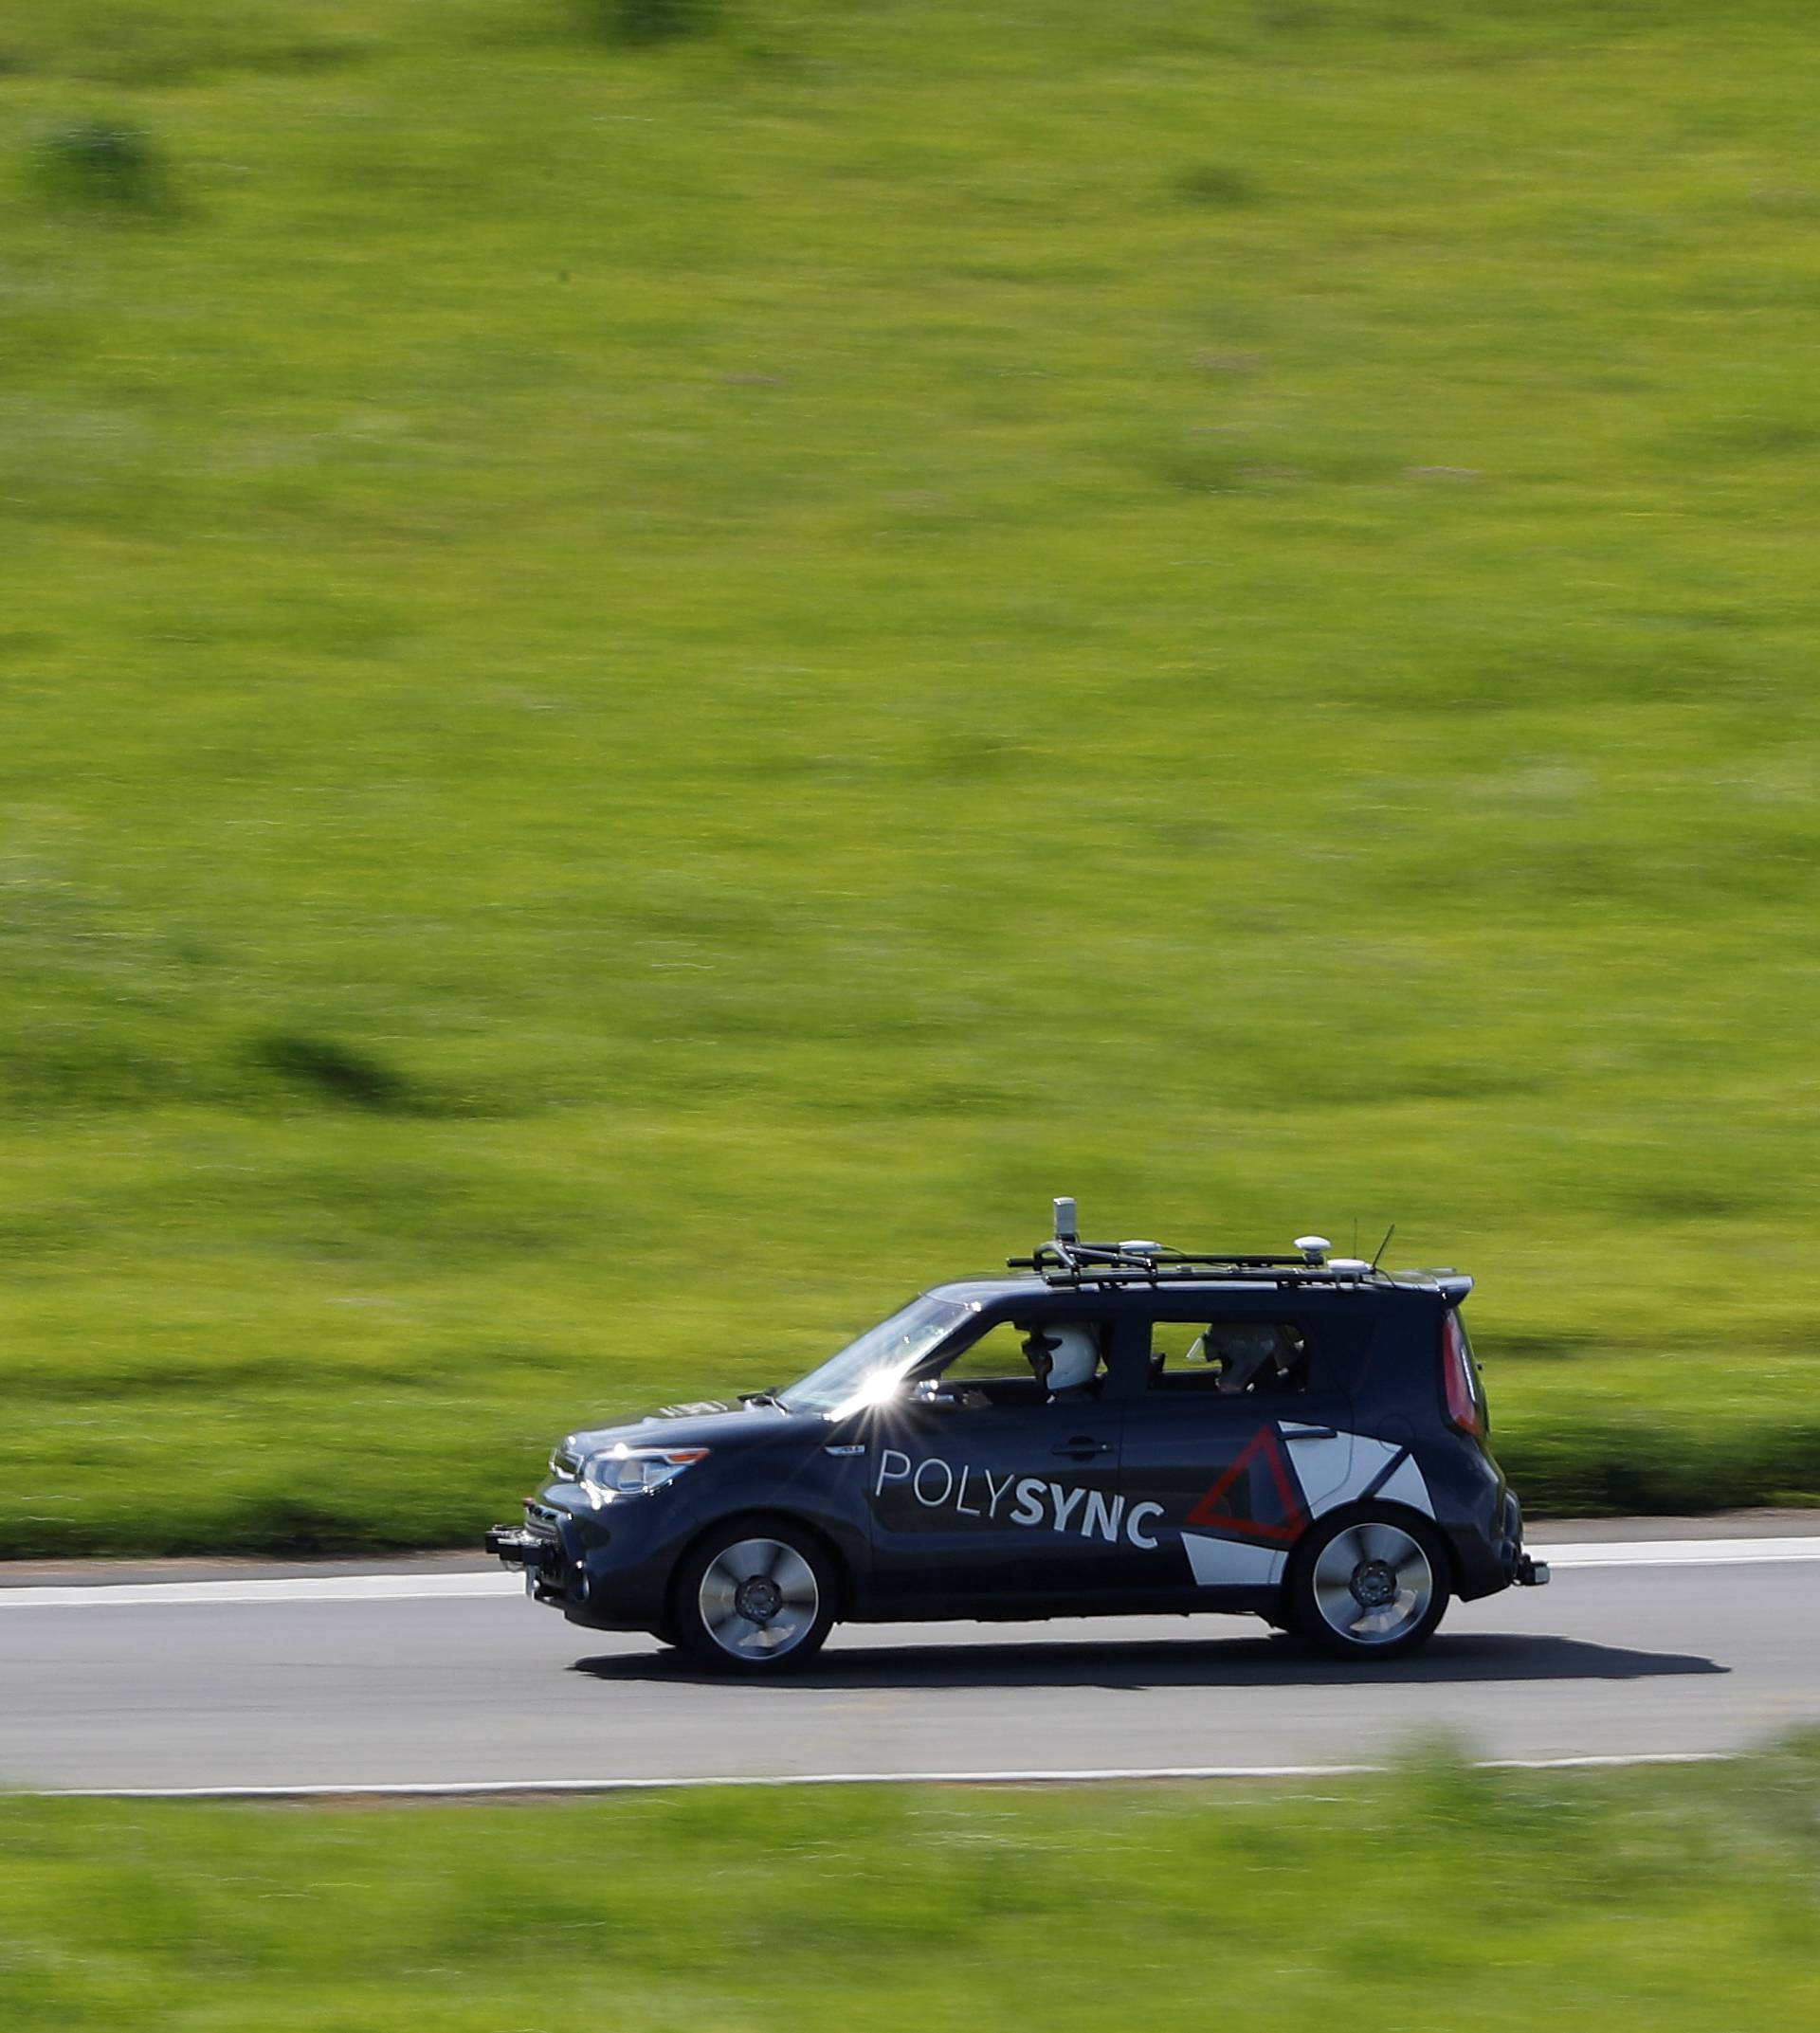 A self-driving car from PolySync drives on the track during a self-racing cars event at Thunderhill Raceway in Willows, California